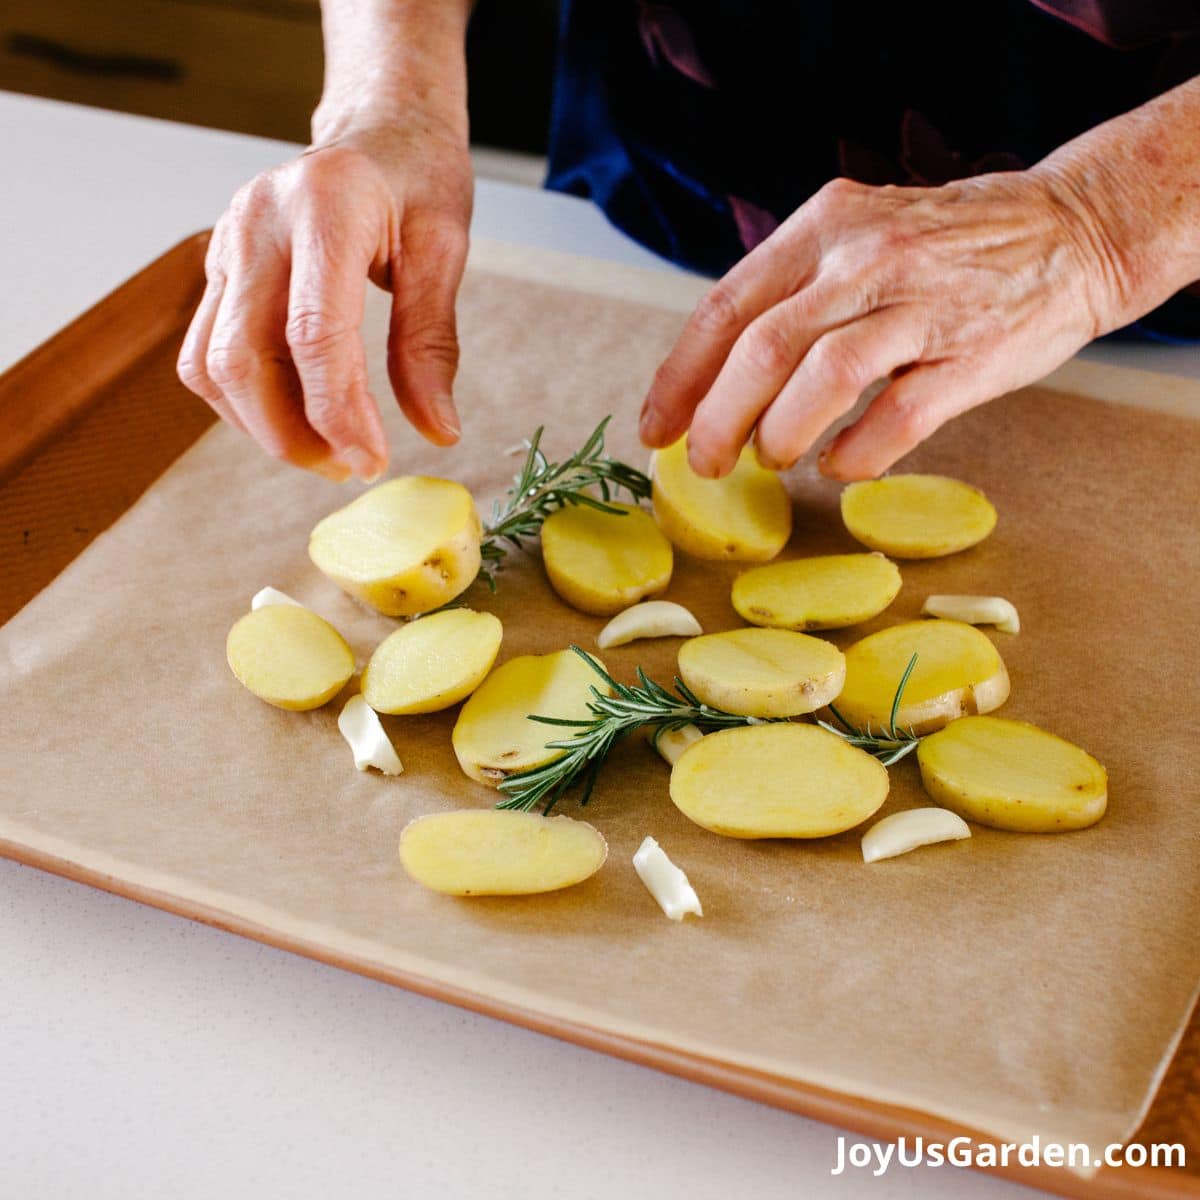 woman is shown cooking using rosemary, on the cookie sheet is rosemary sprigs, potatoes, and and garlic